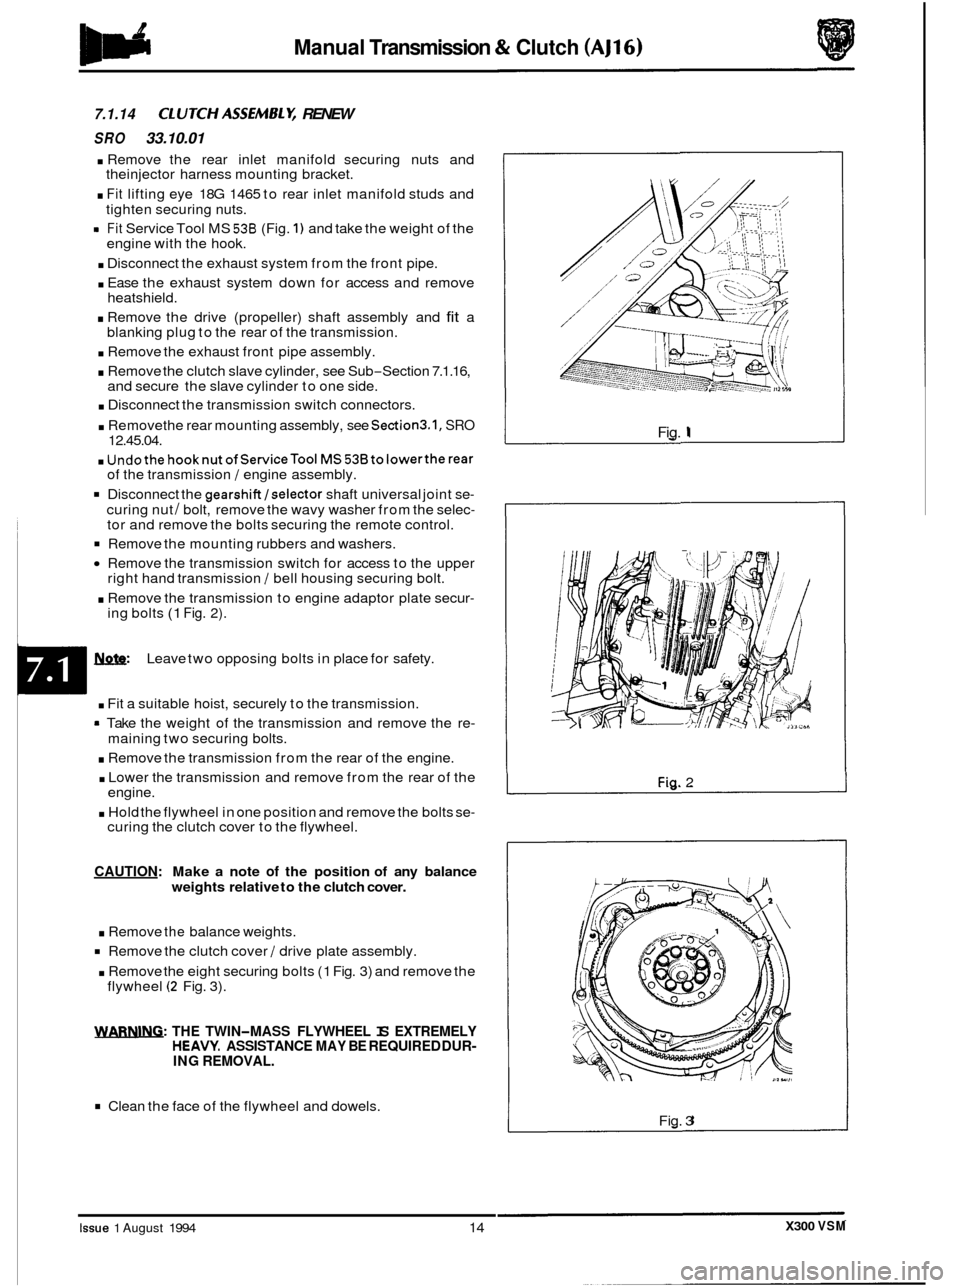 JAGUAR XJ6 1994 2.G Workshop Manual Manual Transmission & Clutch (AJ16) IBh 
7.1.14 ClUTCHASSEMBLY, RENEW 
SRO 33.10.01 
. Remove  the rear  inlet  manifold  securing  nuts  and 
. Fit lifting eye 18G  1465  to rear  inlet  manifold  st